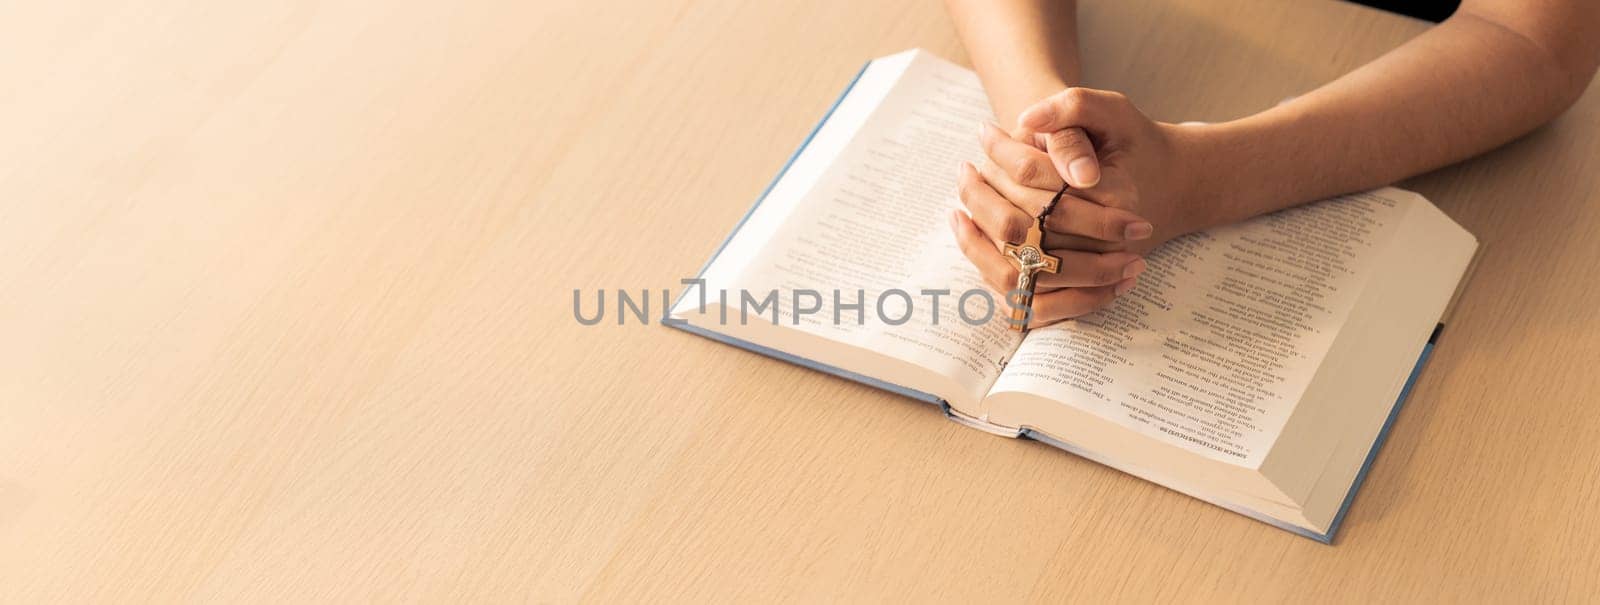 Praying male hand holding cross on holy bible book at wooden table. Burgeoning. by biancoblue